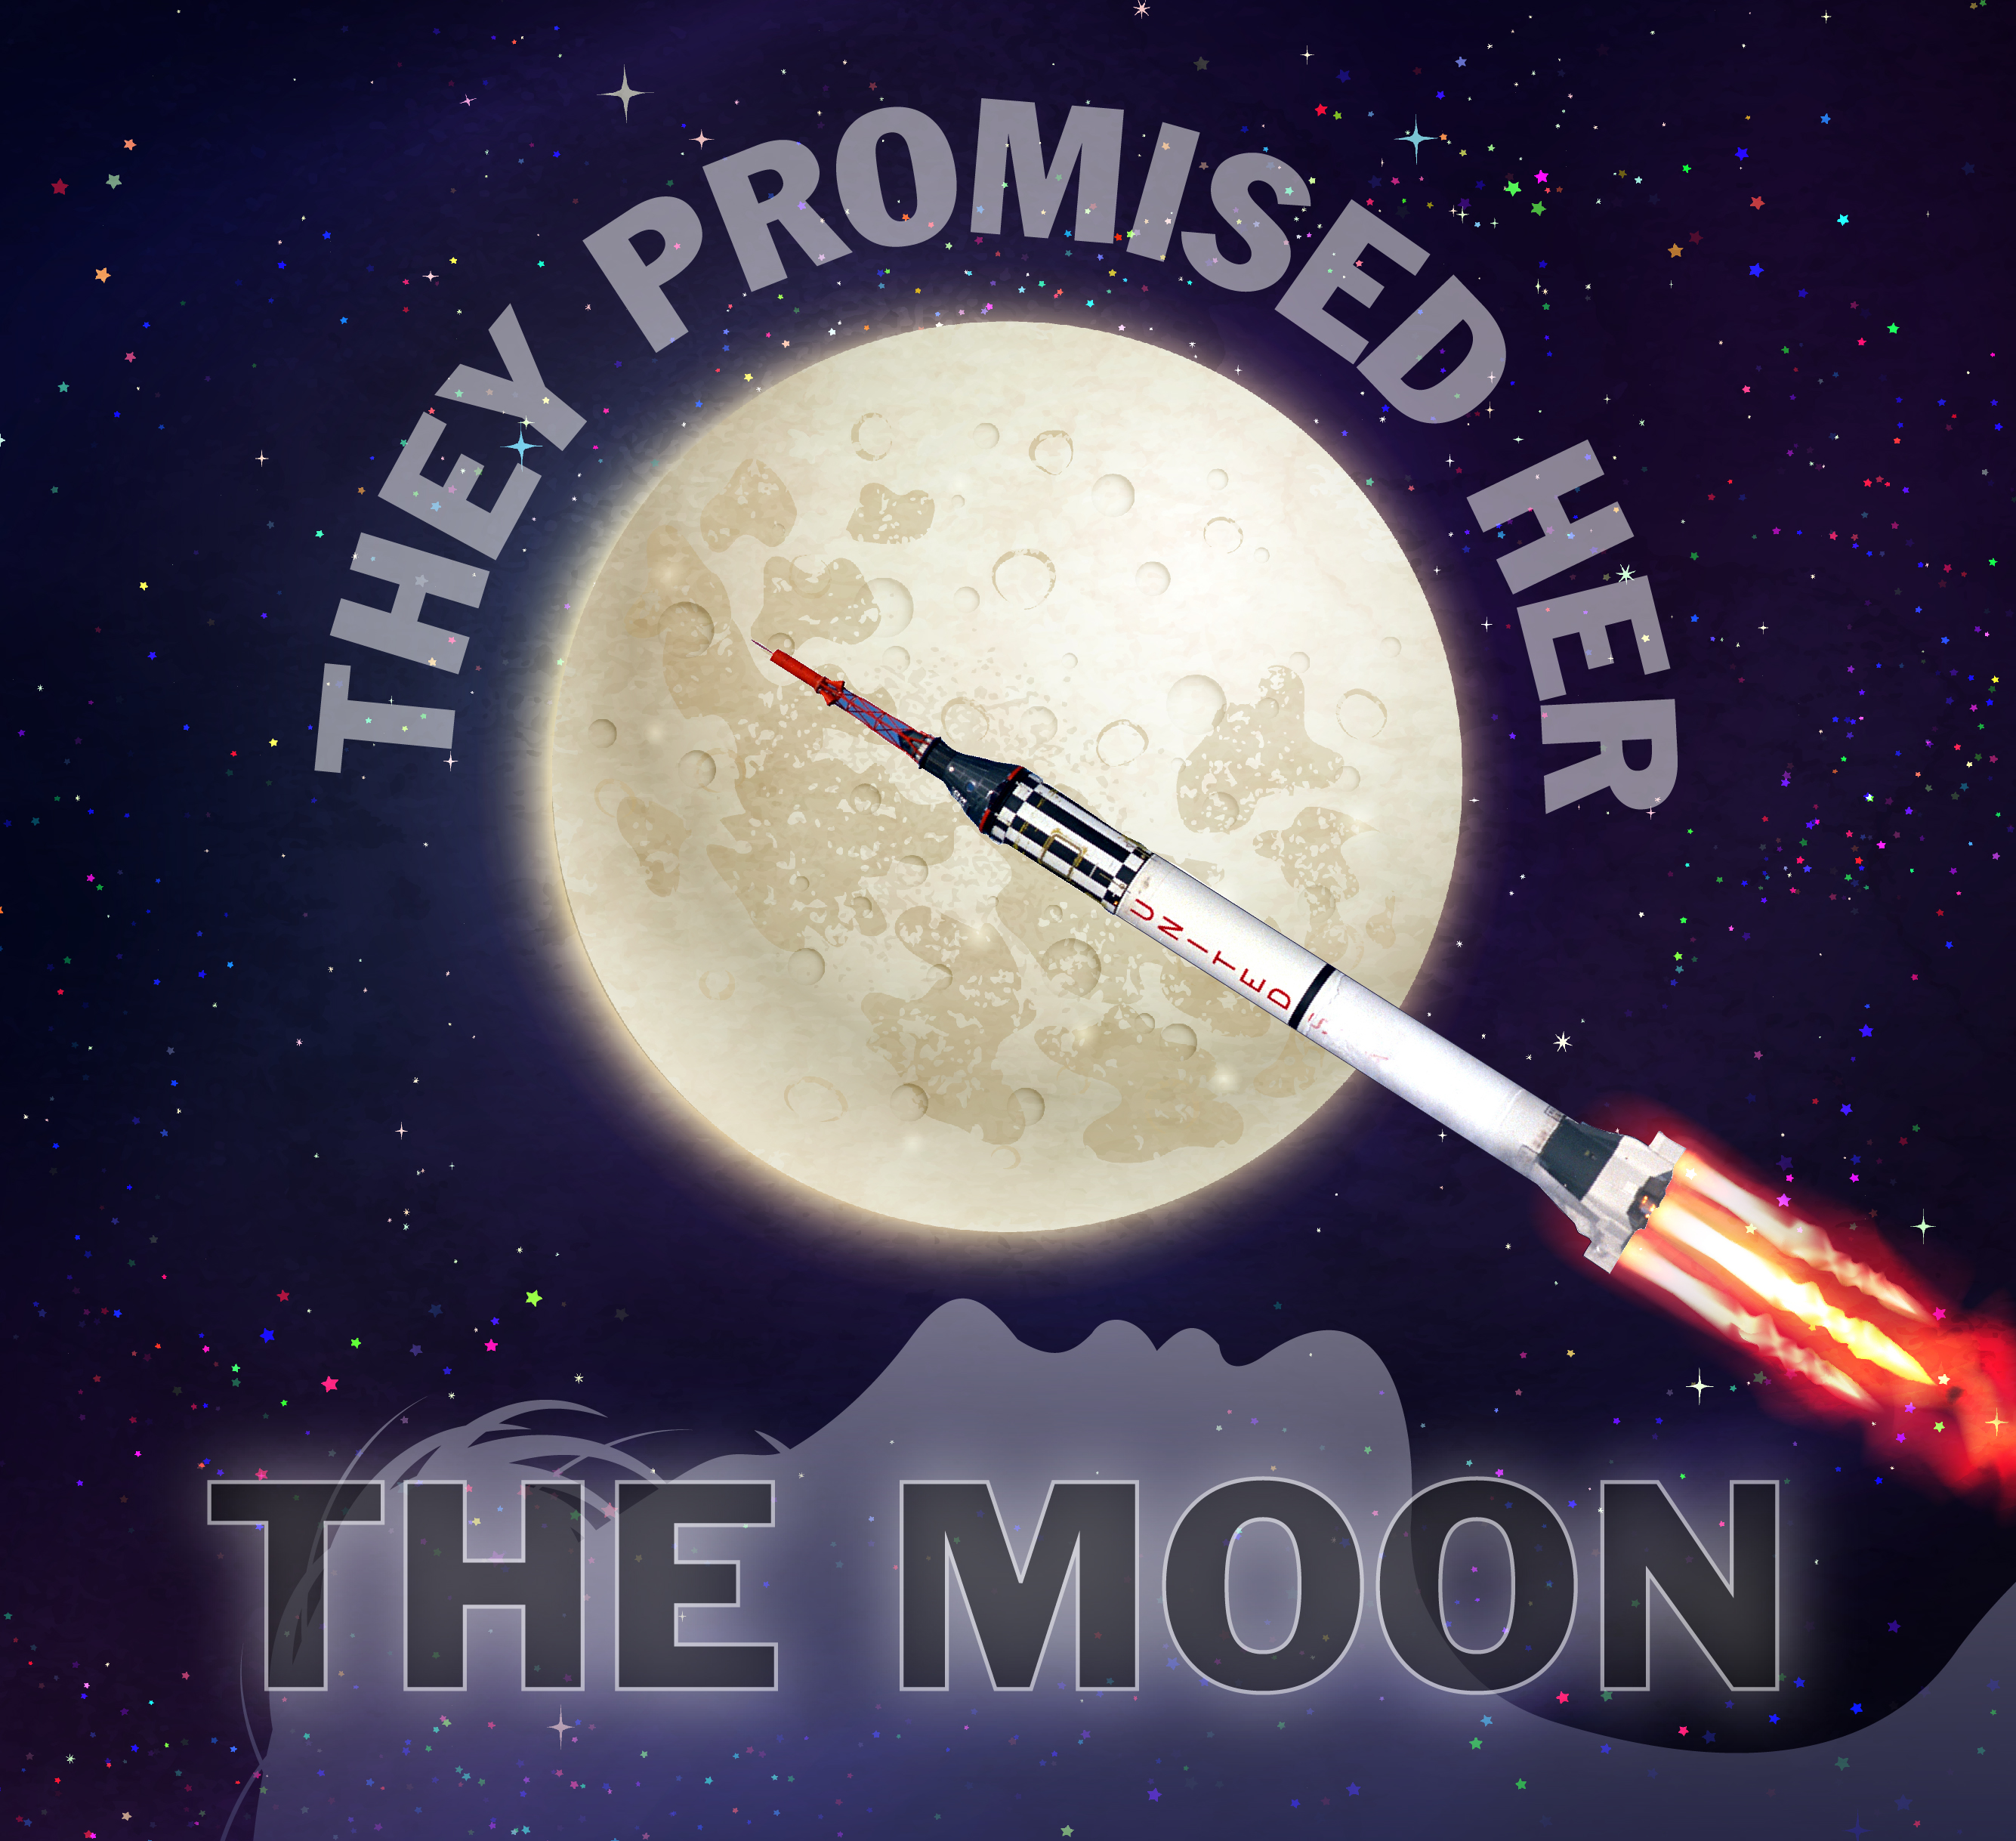 They Promised Her the Moon Image